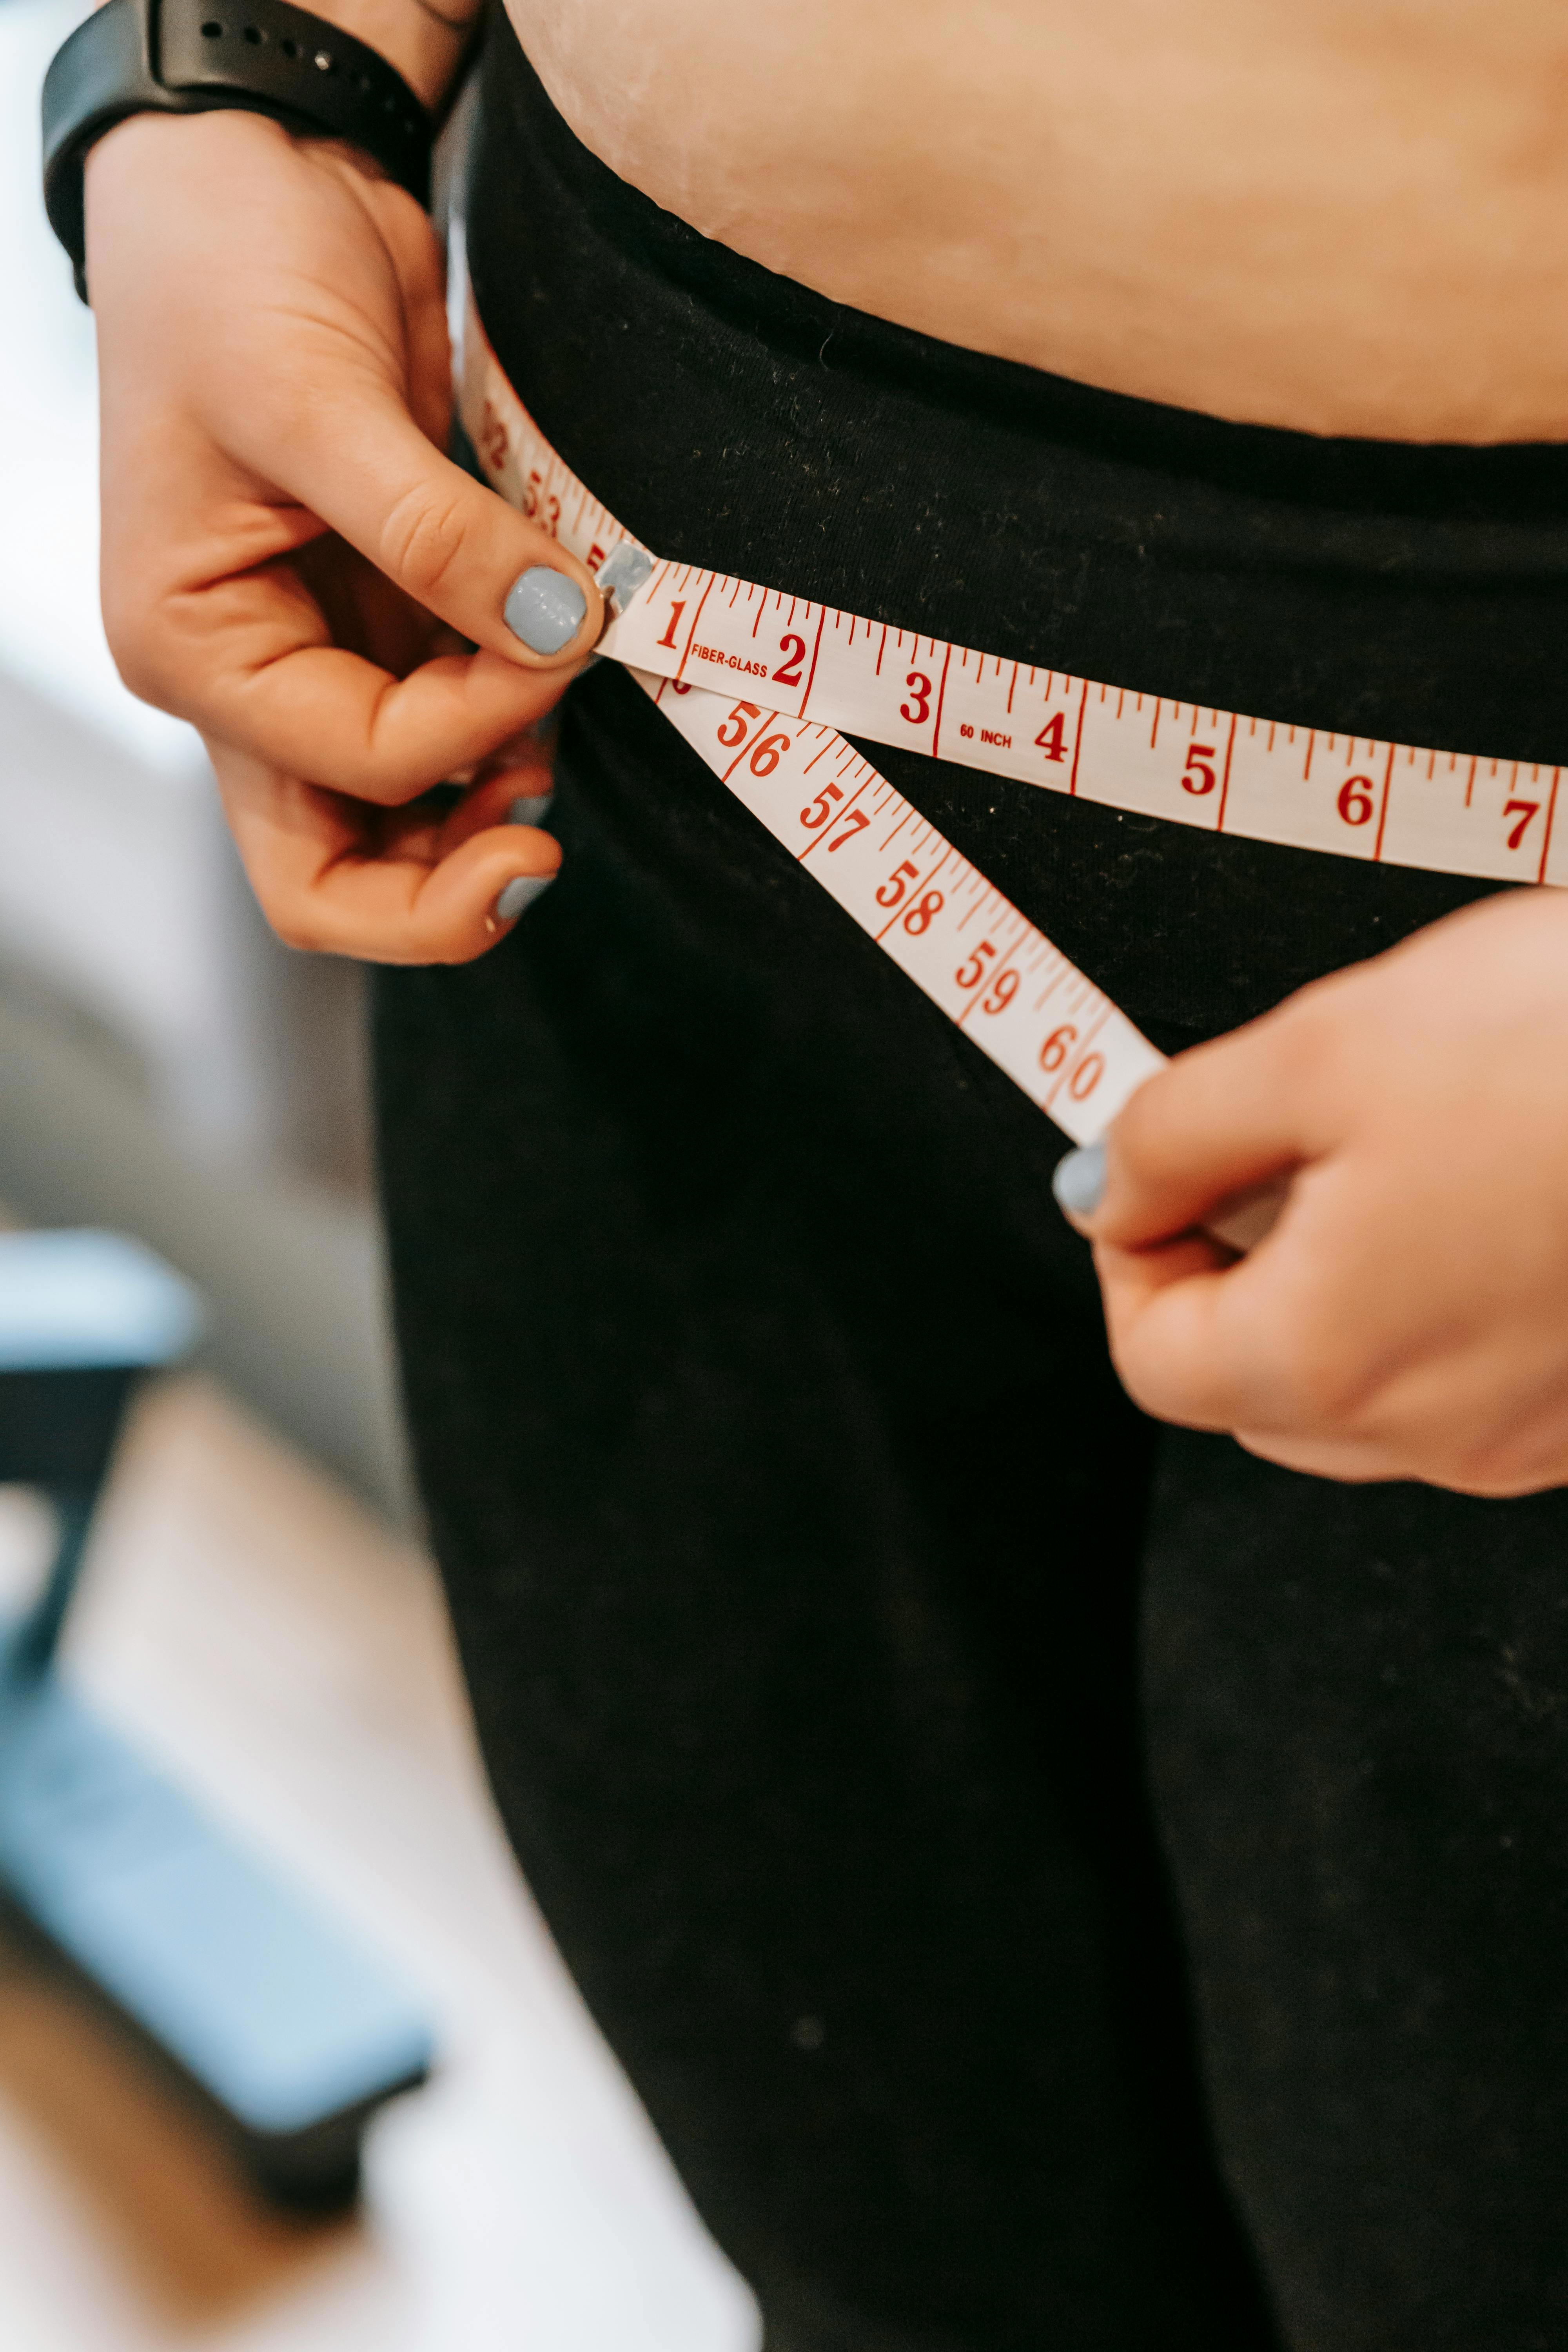 Stock image of a woman measuring her hips.